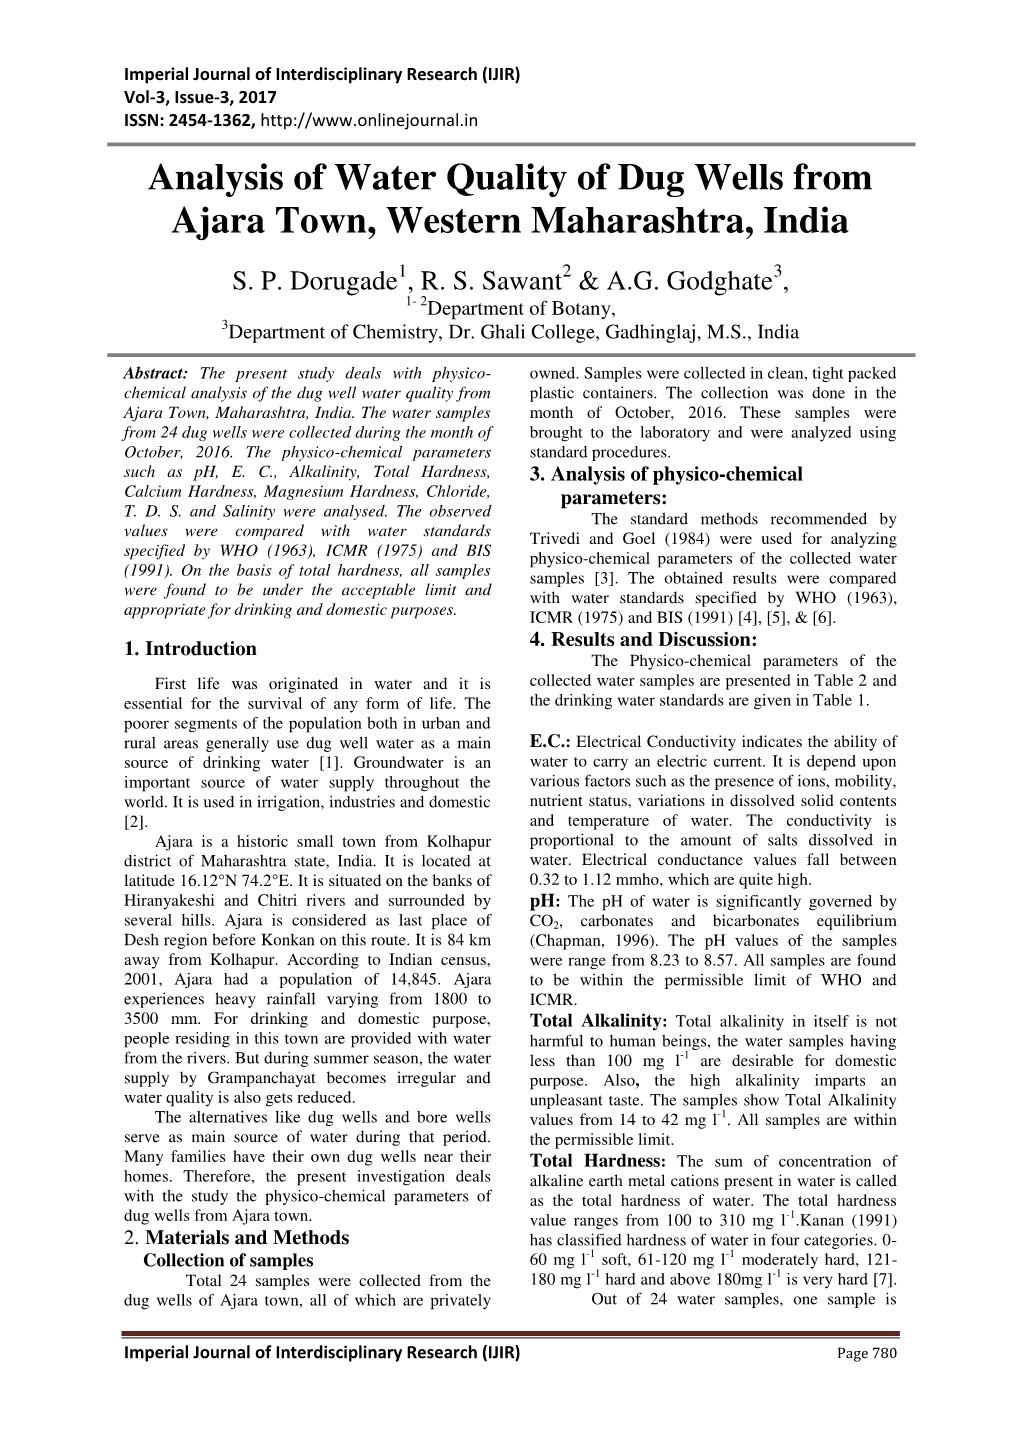 Analysis of Water Quality of Dug Wells from Ajara Town, Western Maharashtra, India